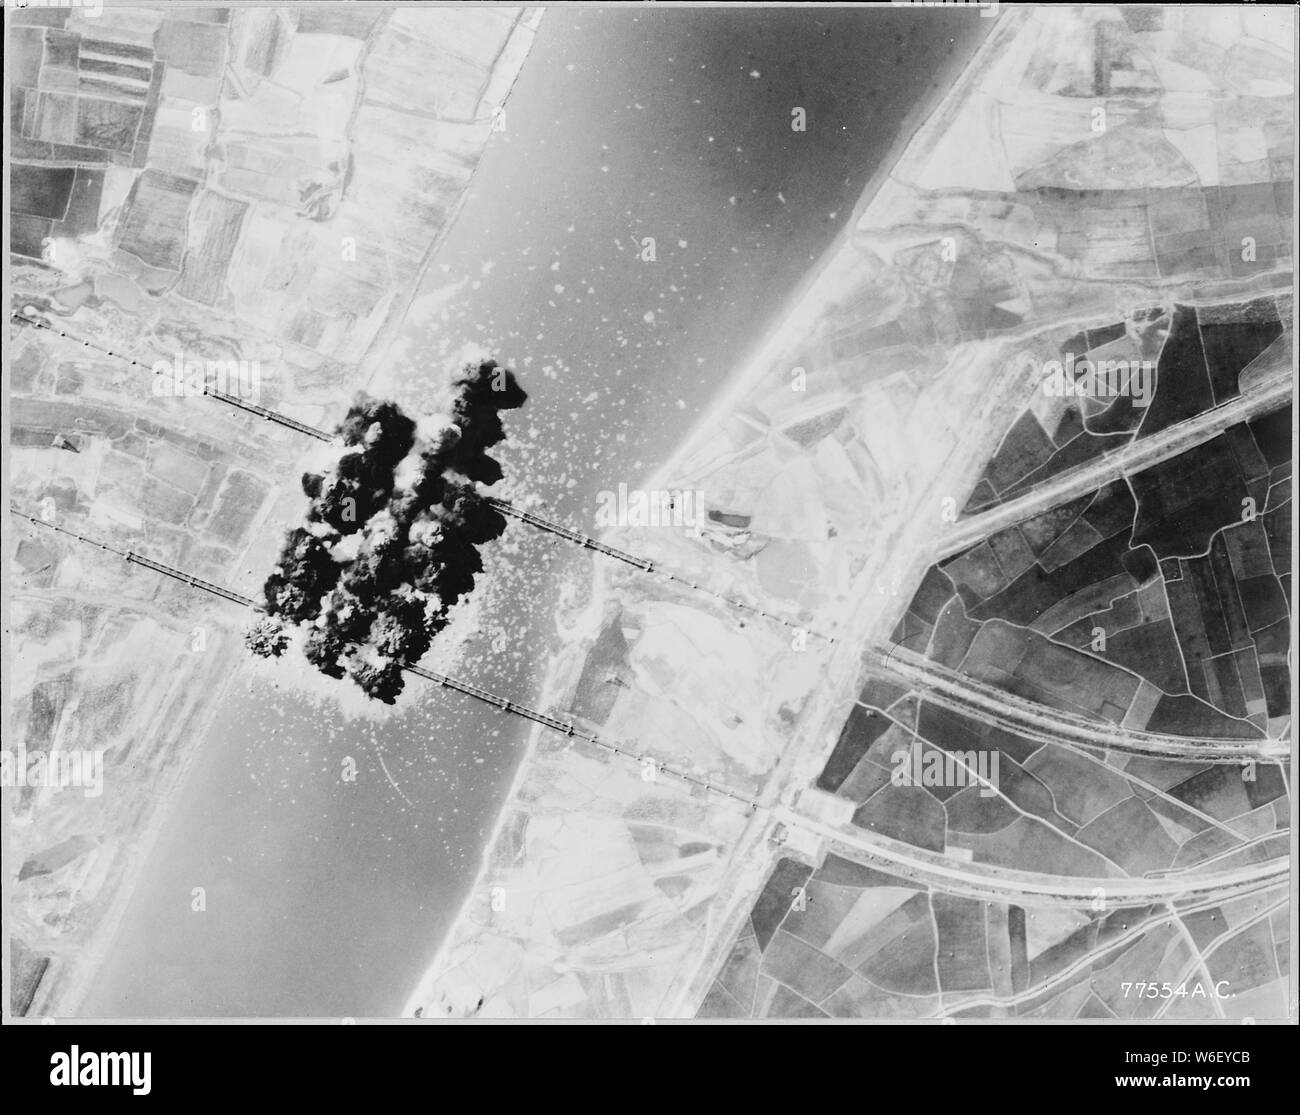 AIR FORCE B-29s STRIKE RAILROAD BRIDGES; Scope and content:  AIR FORCE B-29s STRIKE RAILROAD BRIDGES. Ten tons of bombs from Air Force B-29 Superforts of the FEAF Bomber Command sever these two important railroad bridges near Pakchon, 40 miles north of Pyongyang, in North Korea in an attack made on July 27, 1950. As Captain Meterio Montez of Gardner, Colorado, lead bombardier, released his bombs, the Superforts in the formation did likewise. Montez was in the B-29 piloted by Captain Leslie Westberg, Spokane, Washington. Military supply traffic from North Korea formerly routed over these rail l Stock Photo